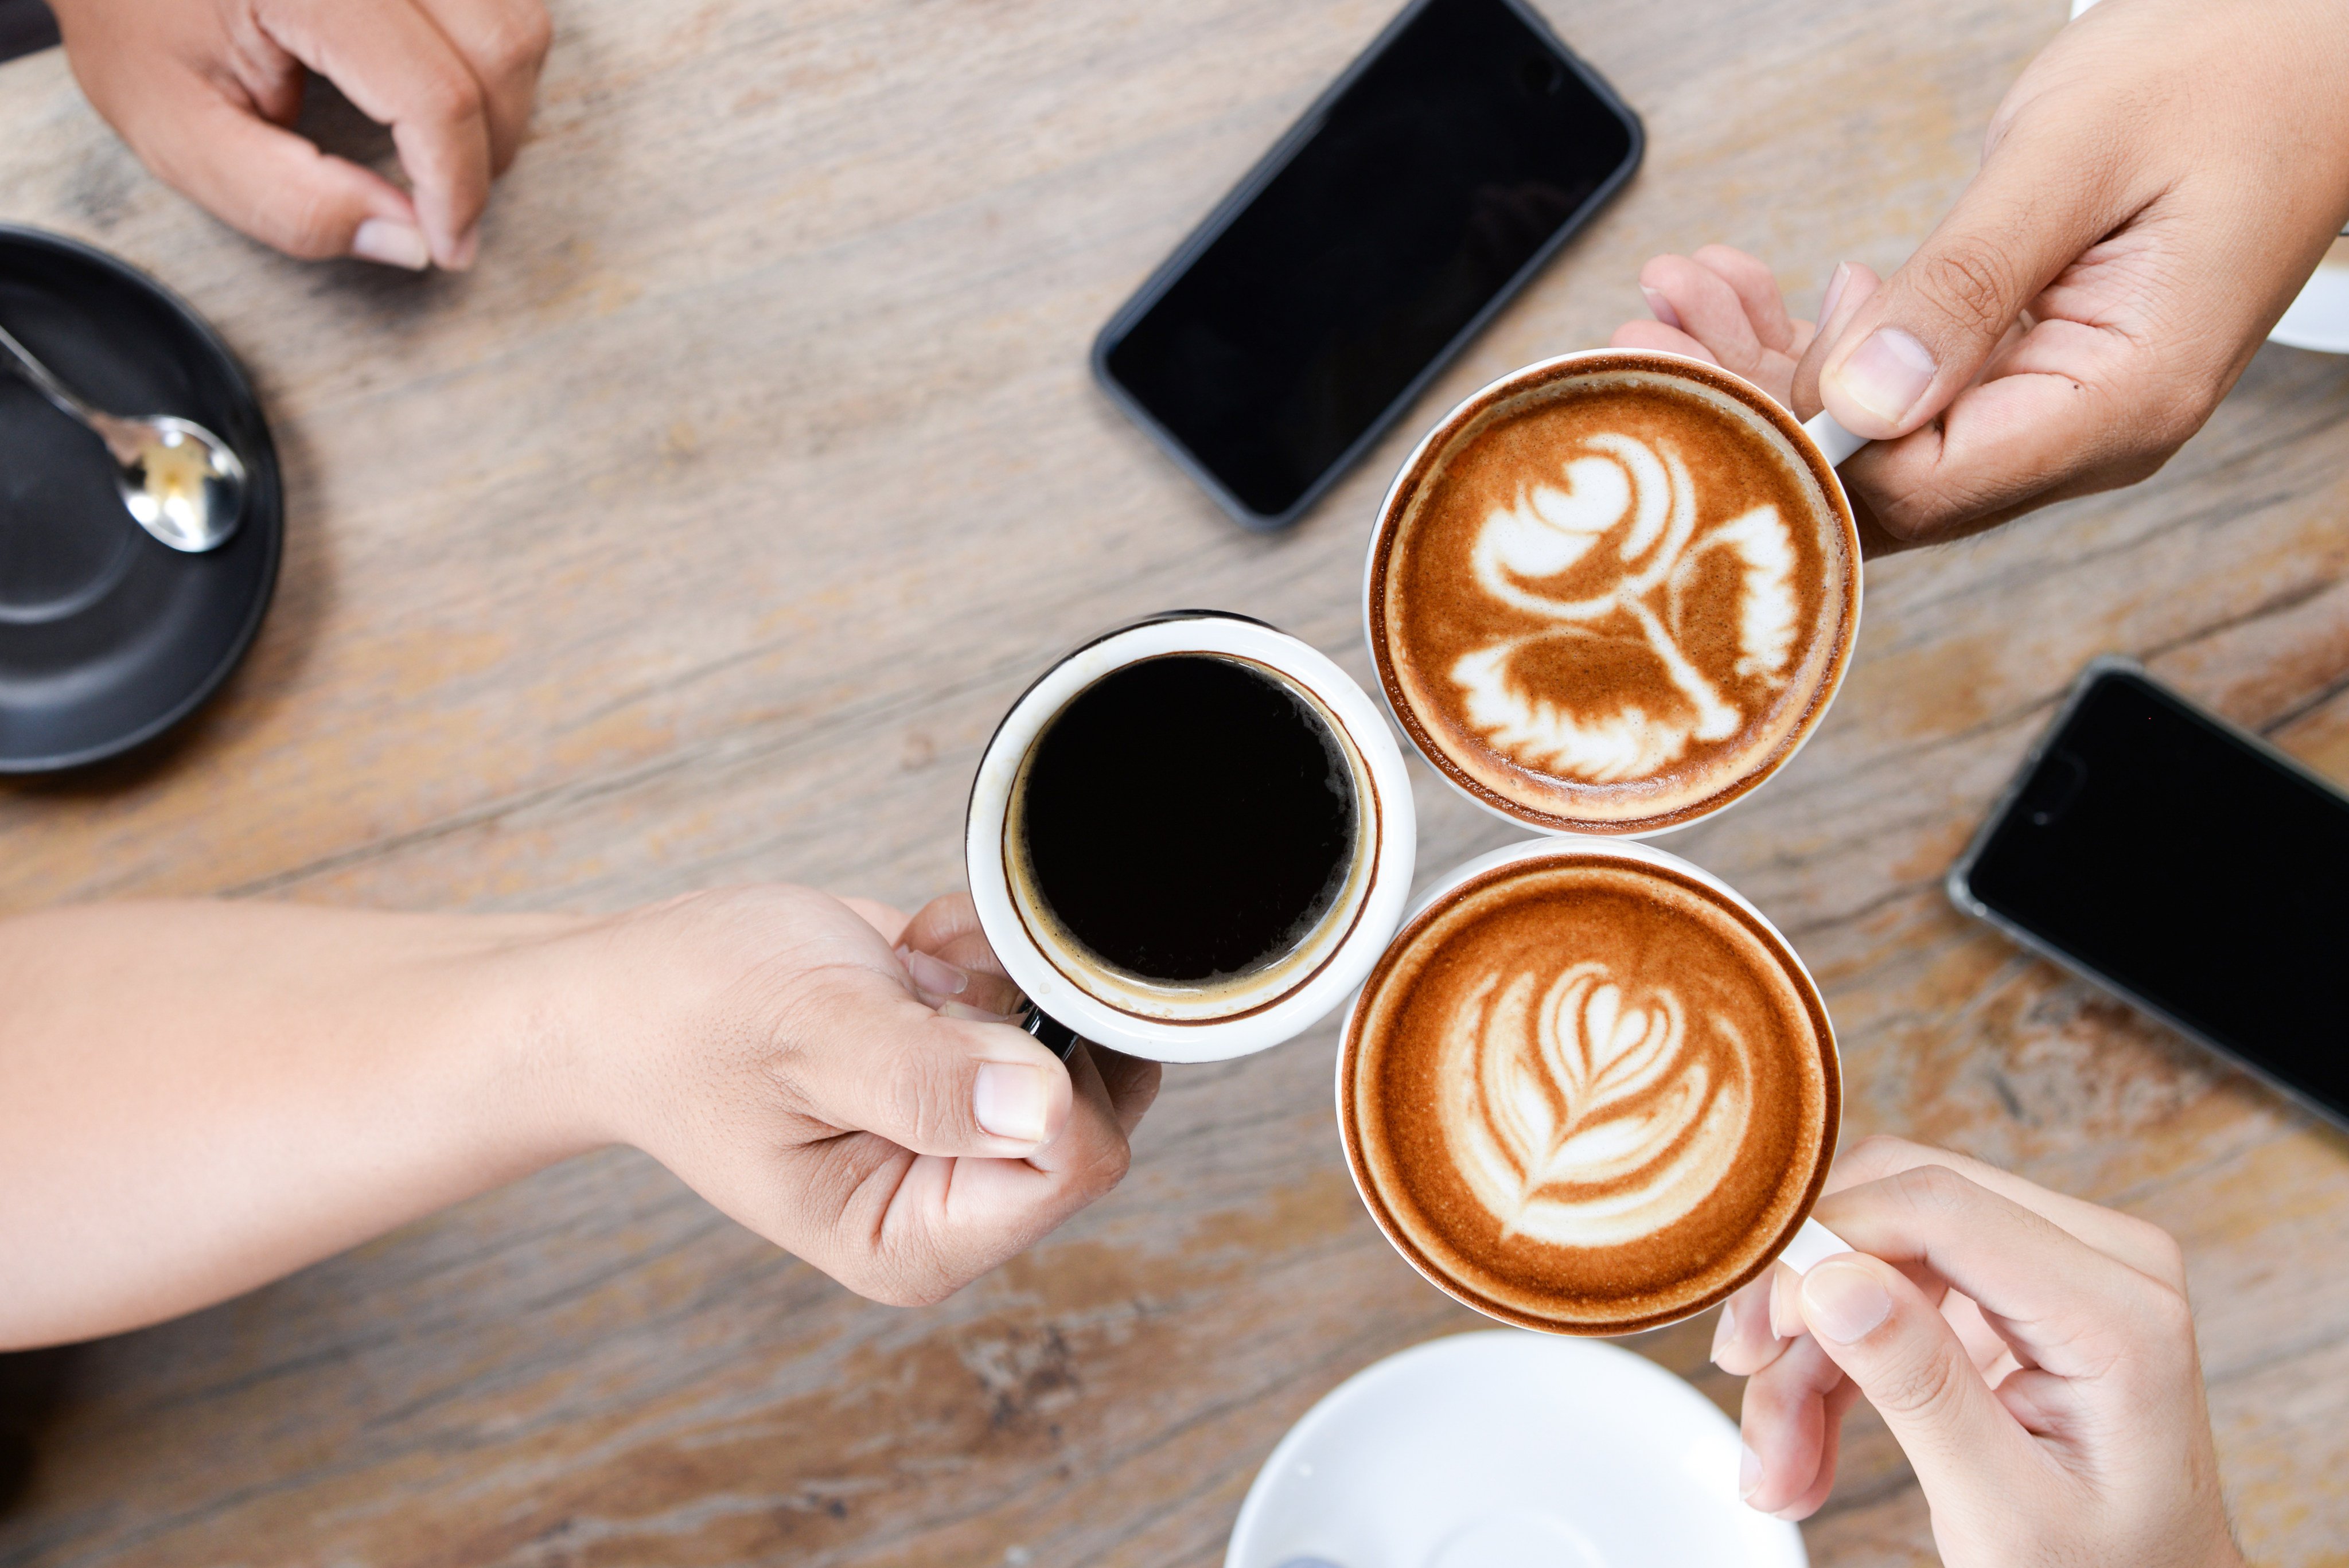 If regular coffee upsets your stomach or gives you the jitters, try an alternative: low-acid, low-caffeine or Bulletproof keto coffee. Photo: Shutterstock